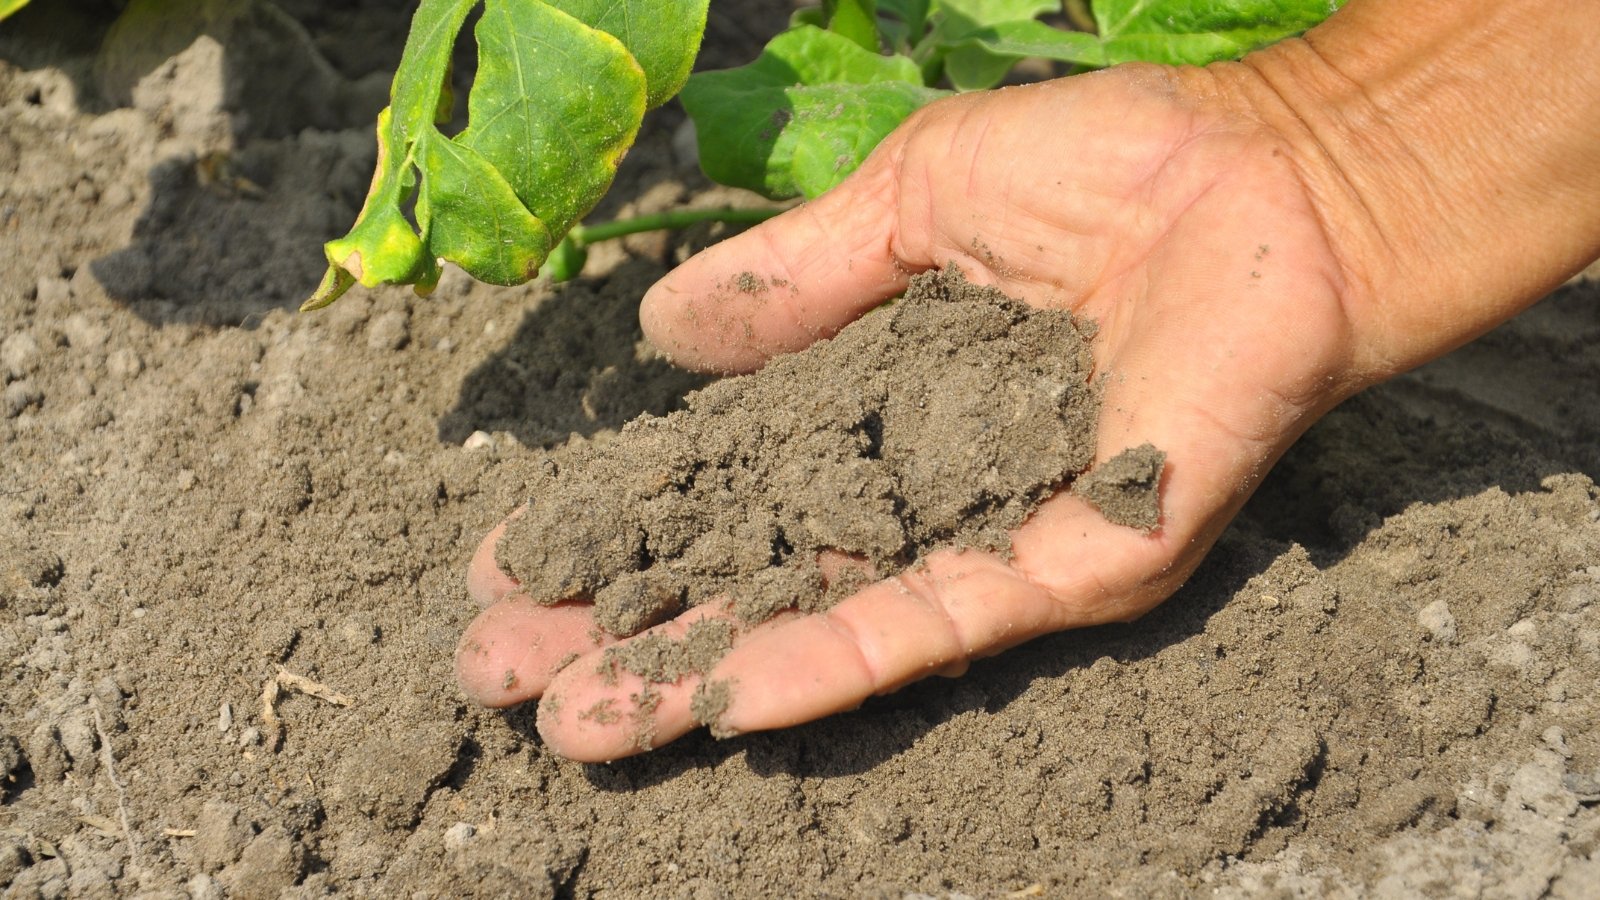 A hand bathed in sunlight gently holds rich, brown soil, nurturing life's essence in its grasp, symbolizing care, warmth, and the intimate connection between humanity and the earth.